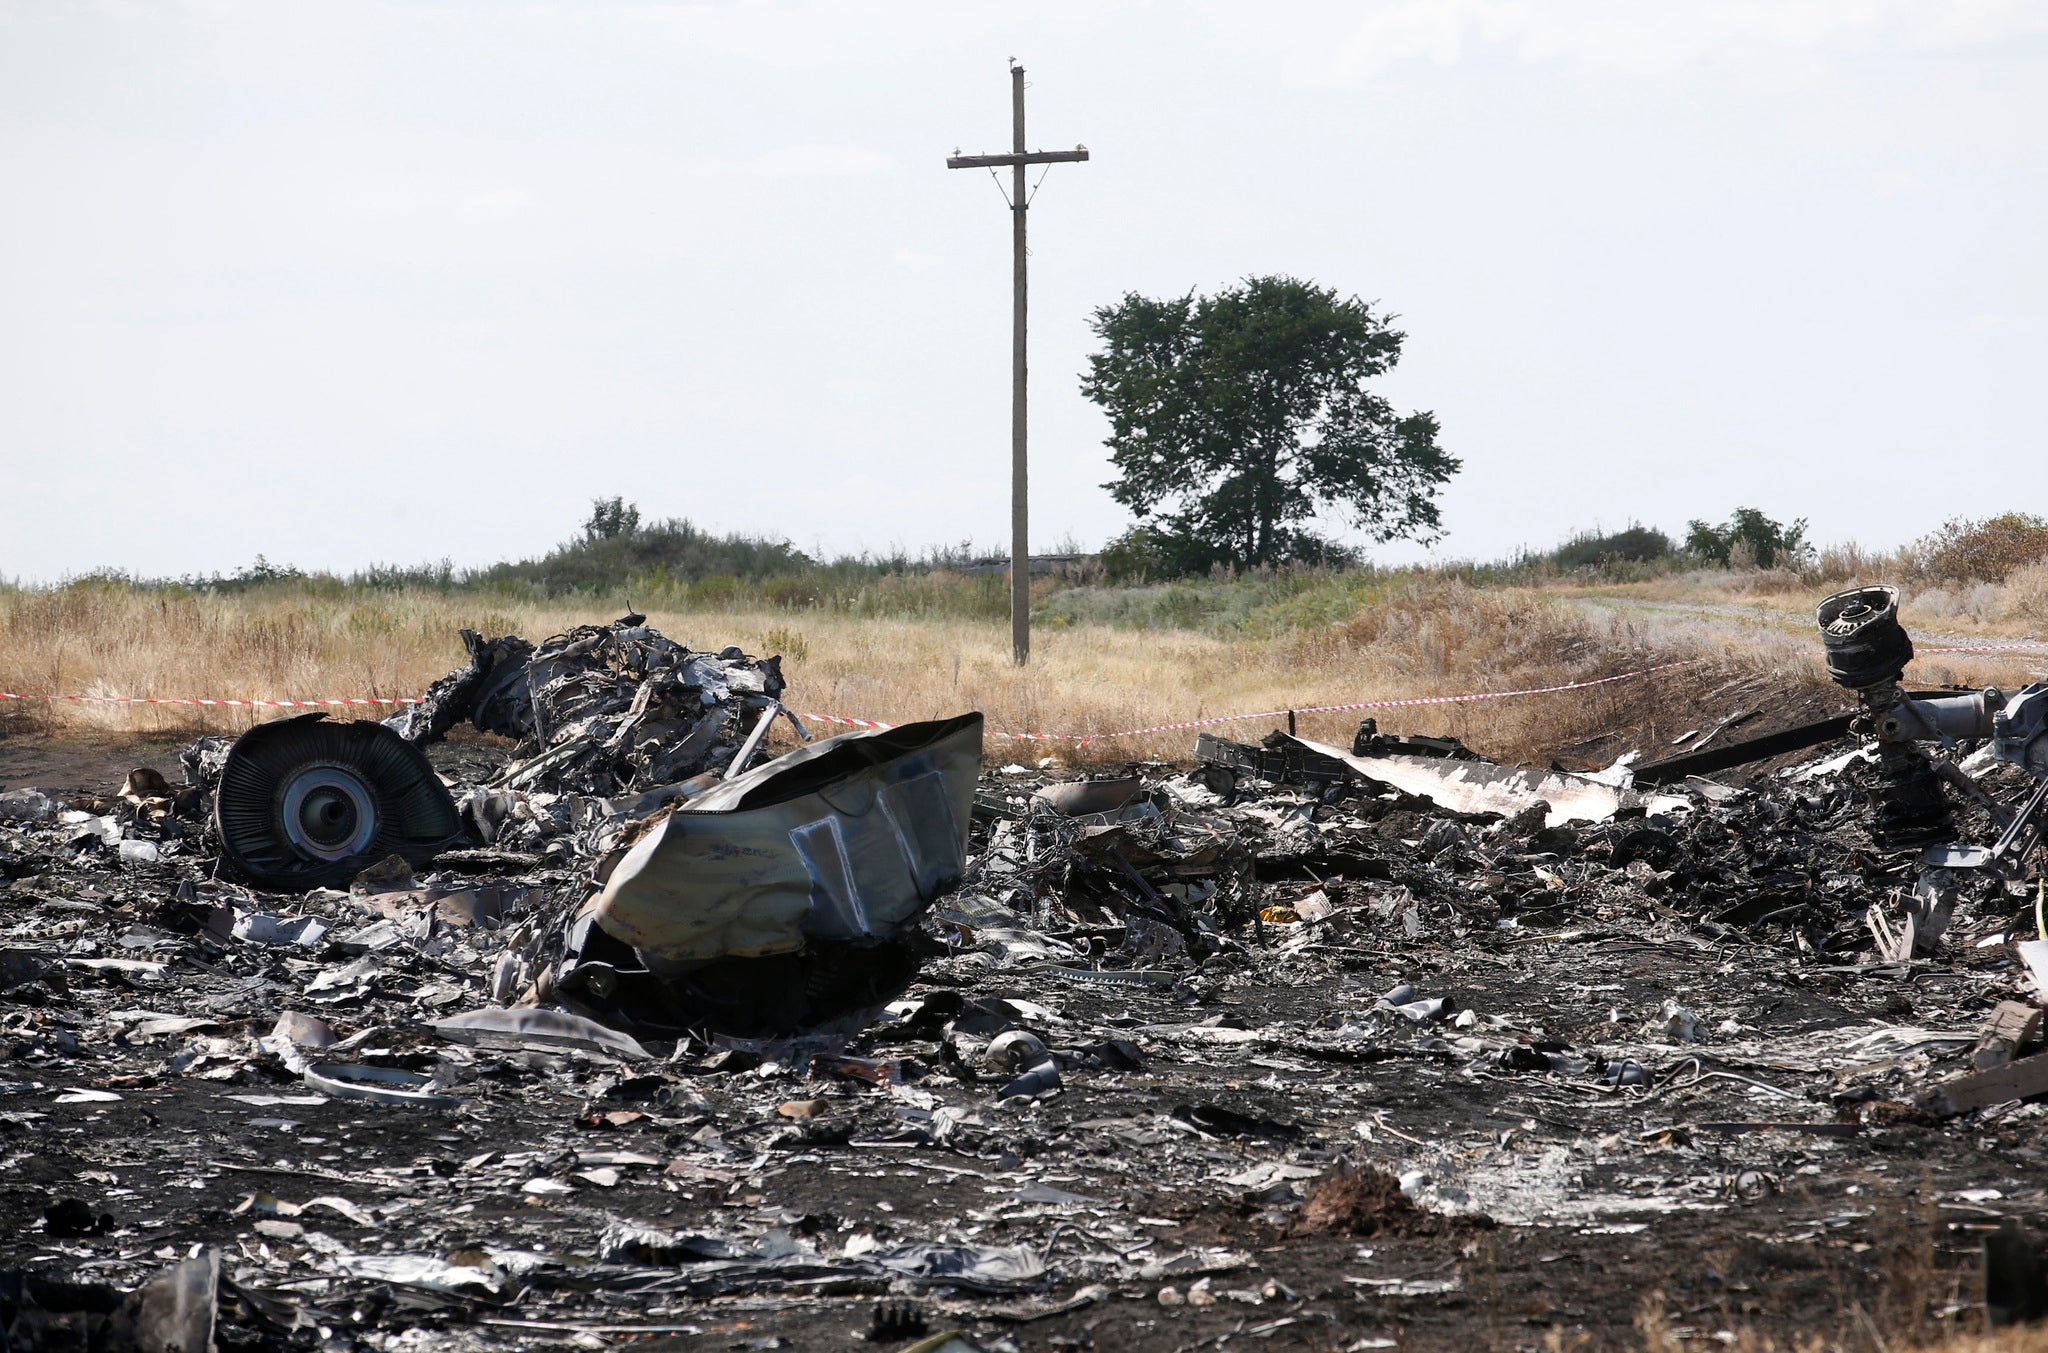 Ukraine had a jet flying close to the Malaysia Airlines passenger plane, Russia has claimed